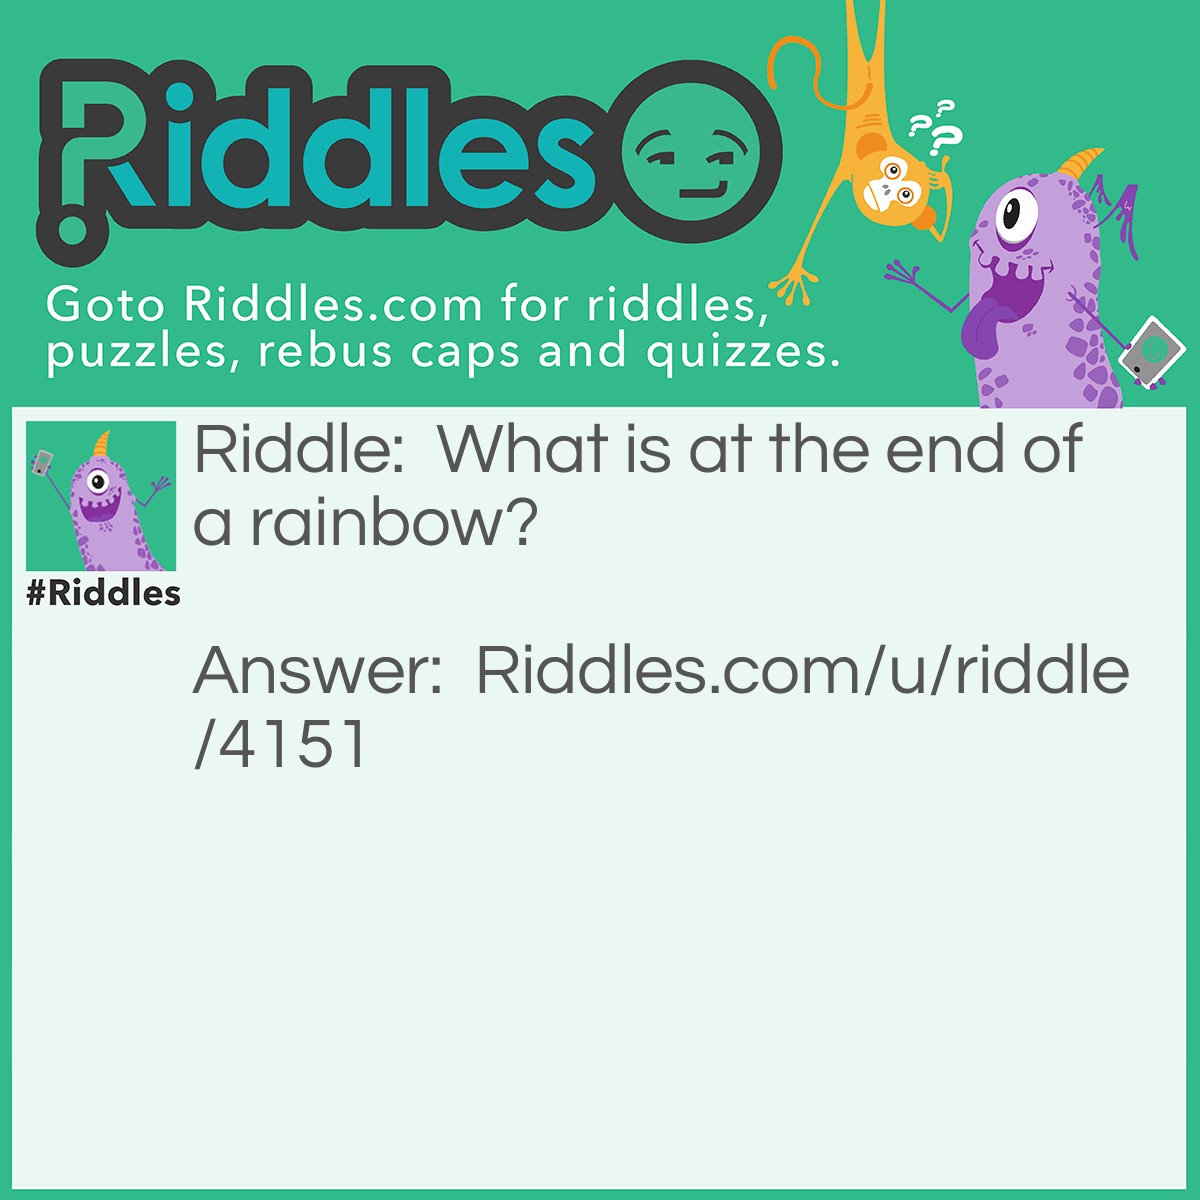 Riddle: What is at the end of a rainbow? Answer: W is at the end of the word rainbow.